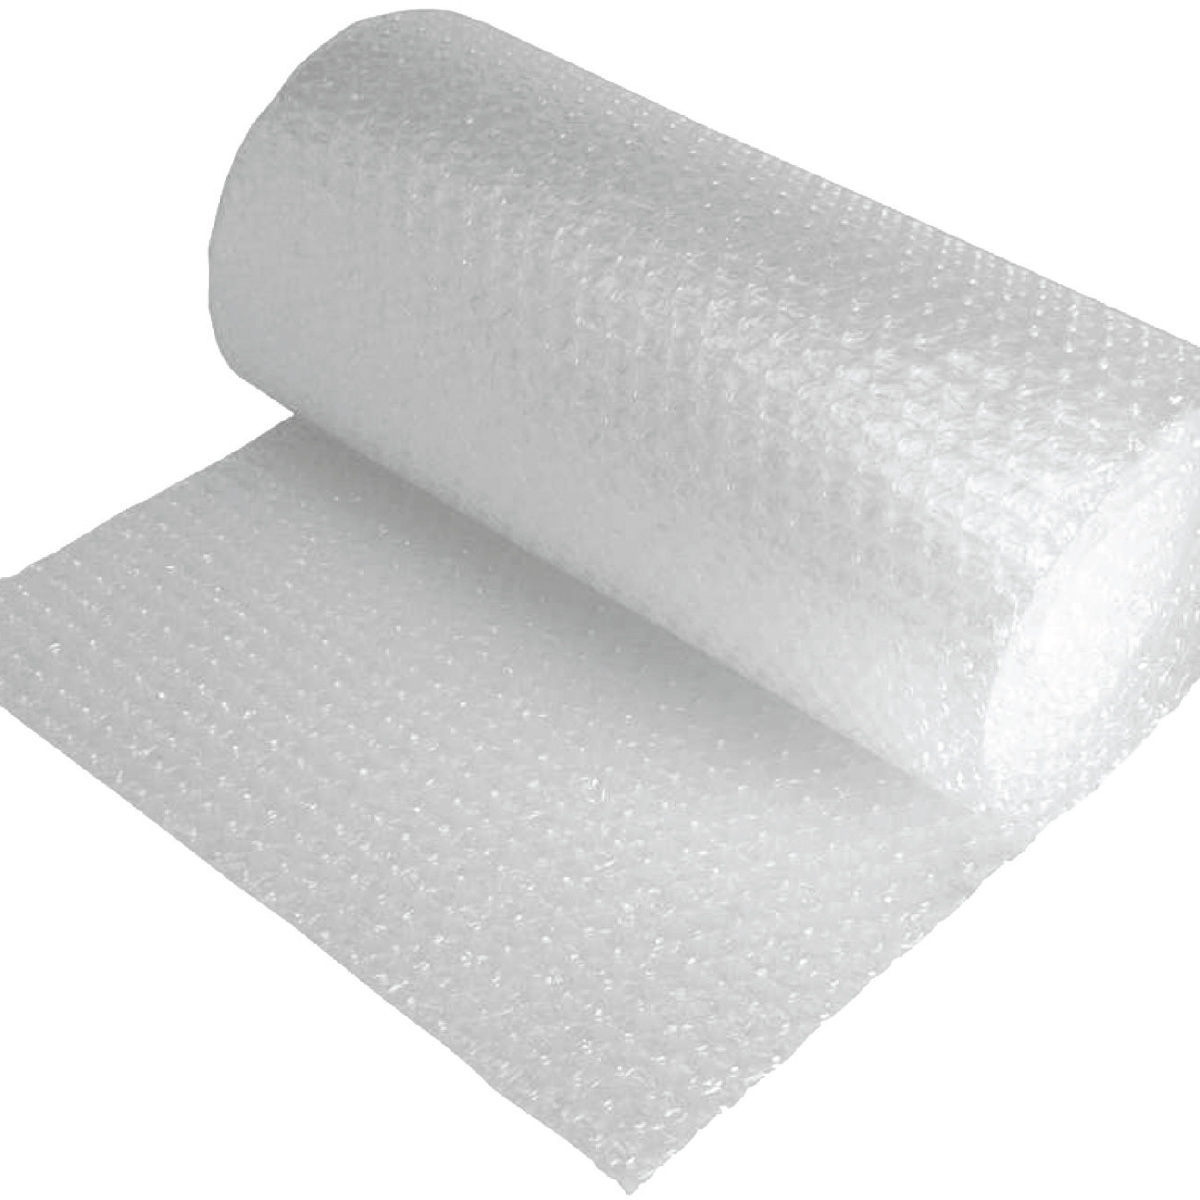 1/2 48 x 125` Slit 24 Perfed 12 Retail Length Large Bubble (2  rolls/bundle) - GBE Packaging Supplies - Wholesale Packaging, Boxes,  Mailers, Bubble, Poly Bags - GBE Product Packaging Supplies